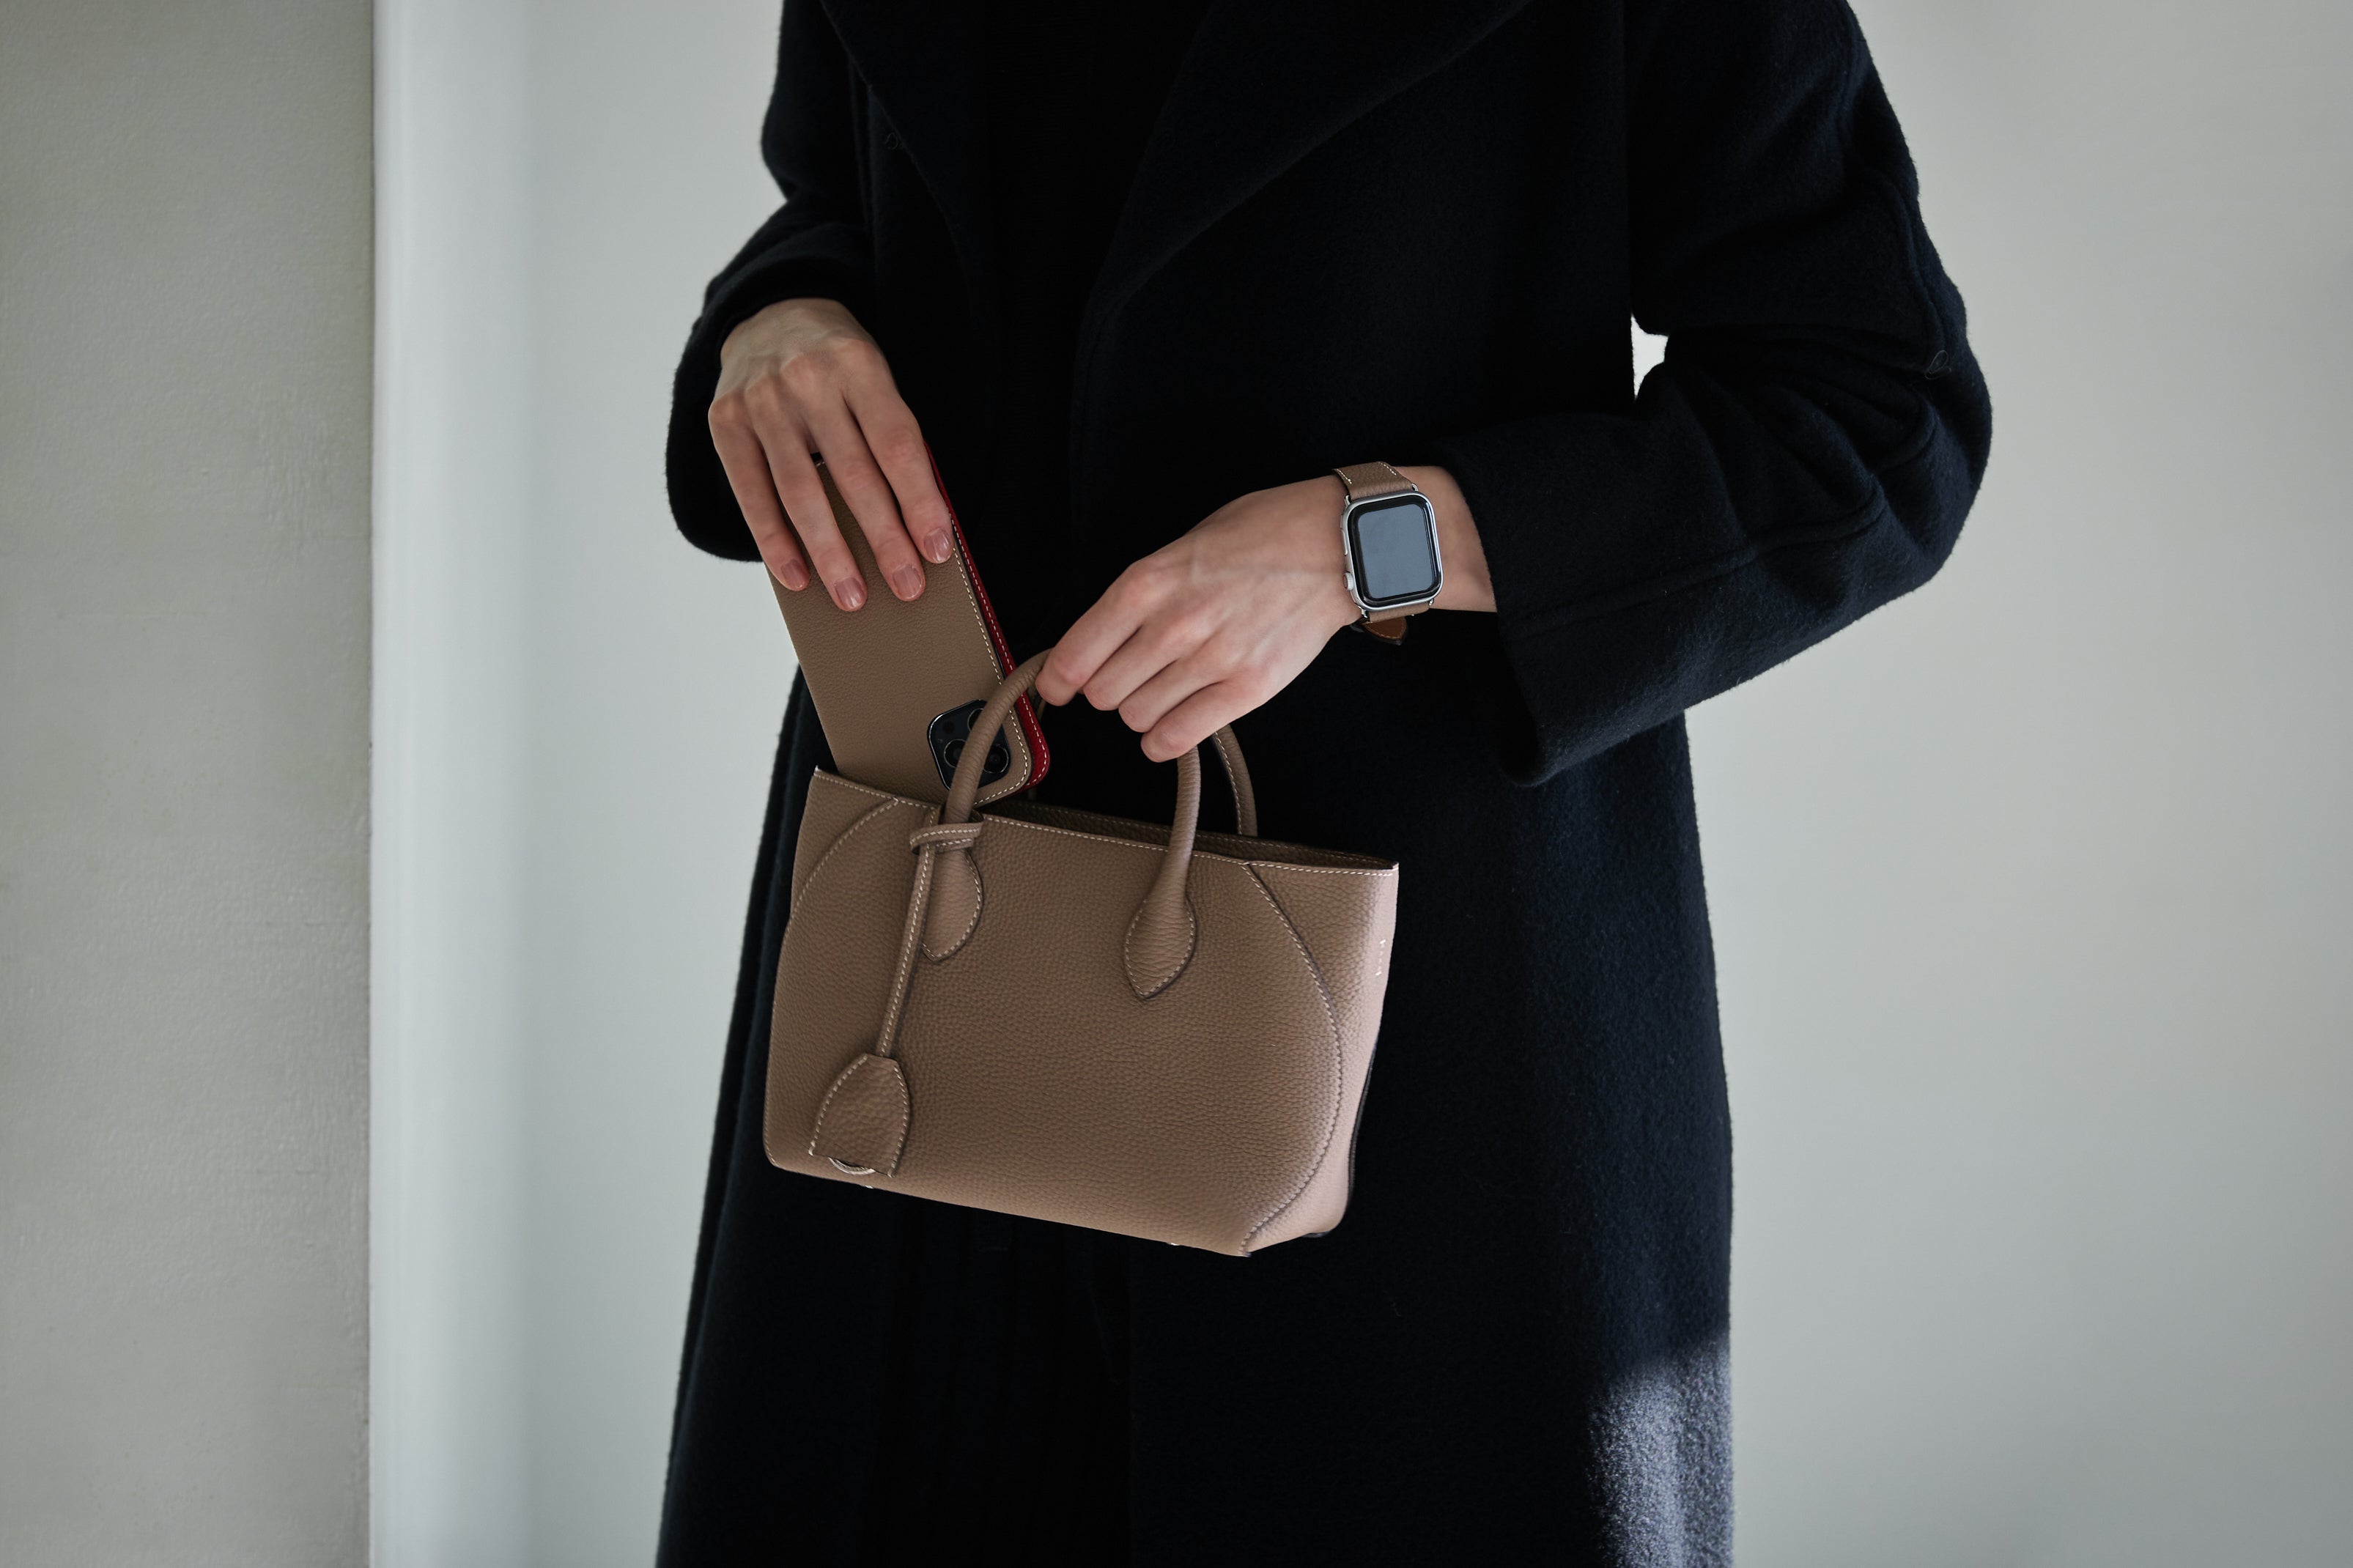 The Mini Mia as a business handbag for the most important items in everyday business life